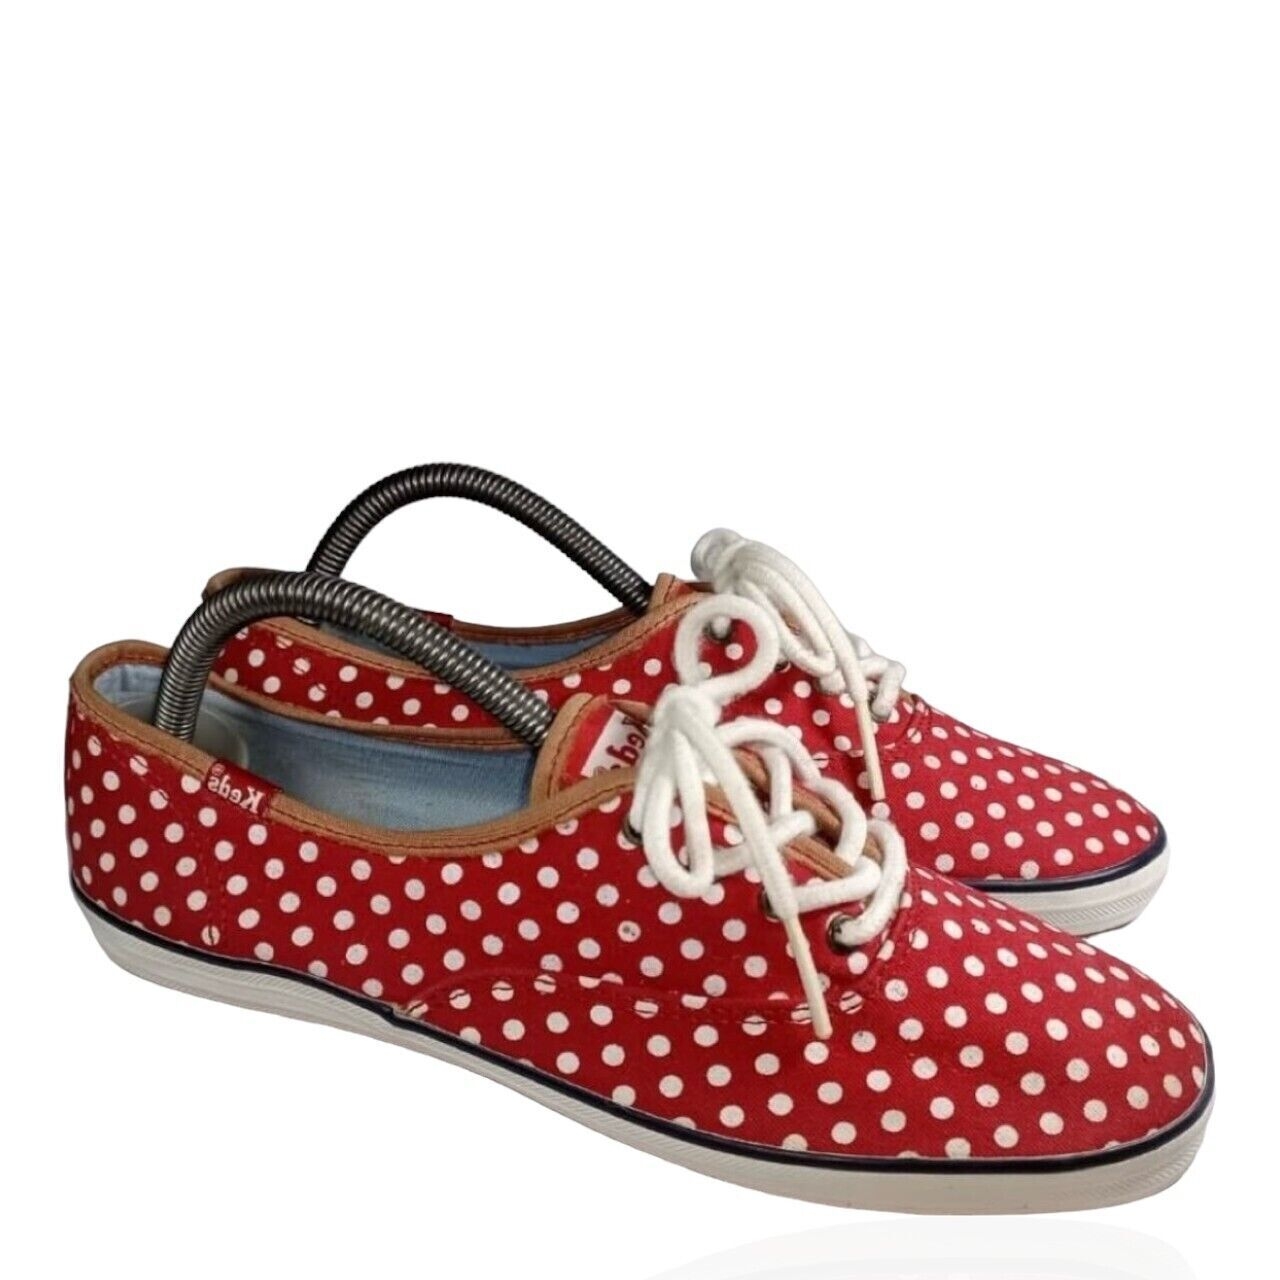 Keds Champion Canvas Red White Polka Dot Sneakers Women's